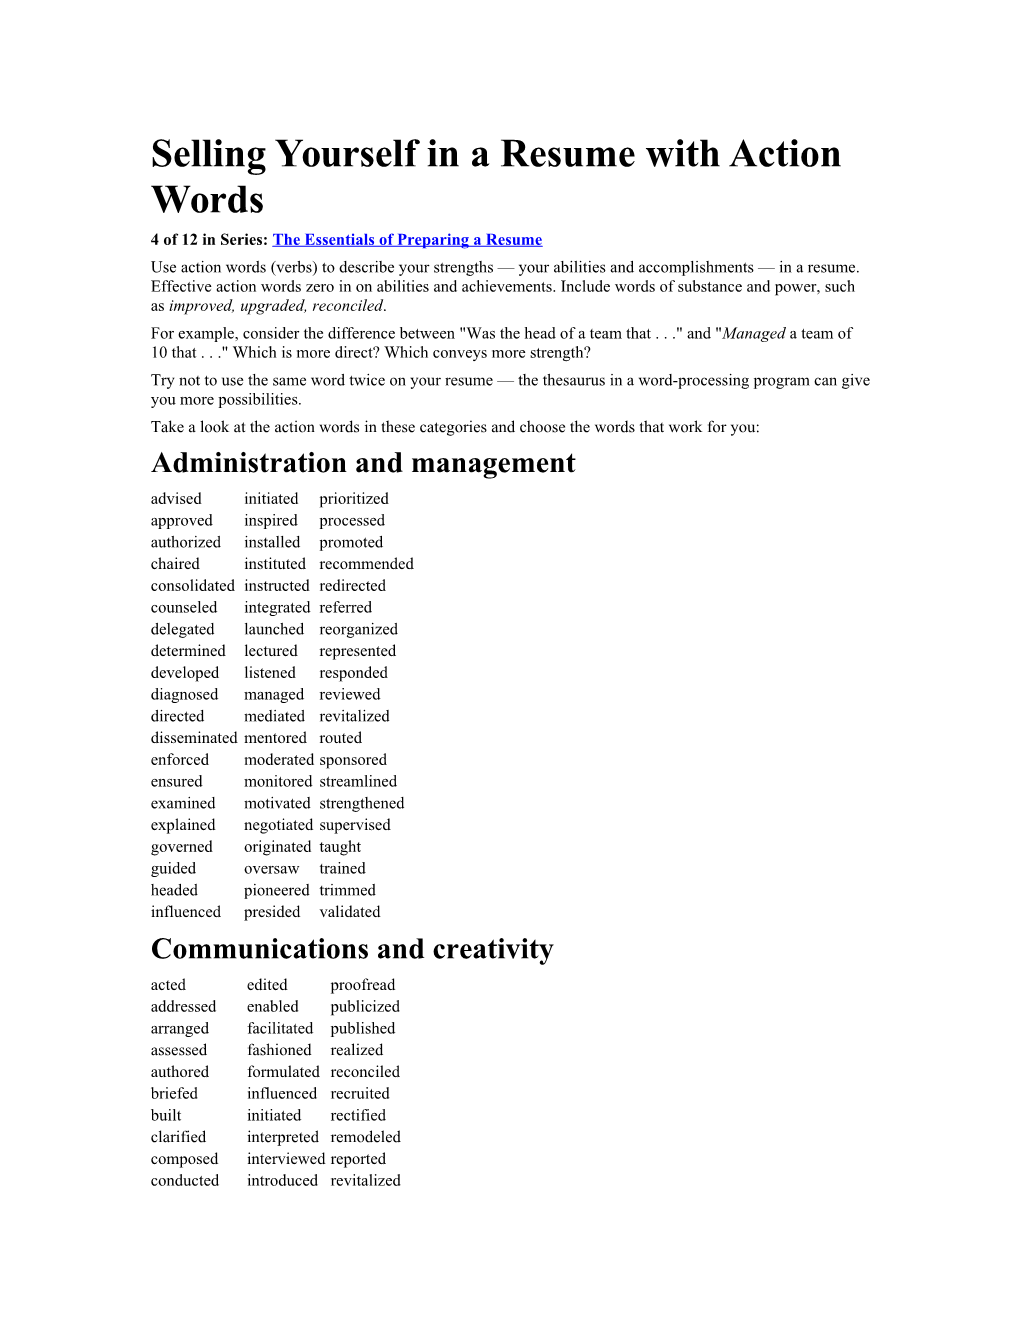 Selling Yourself in a Resume with Action Words